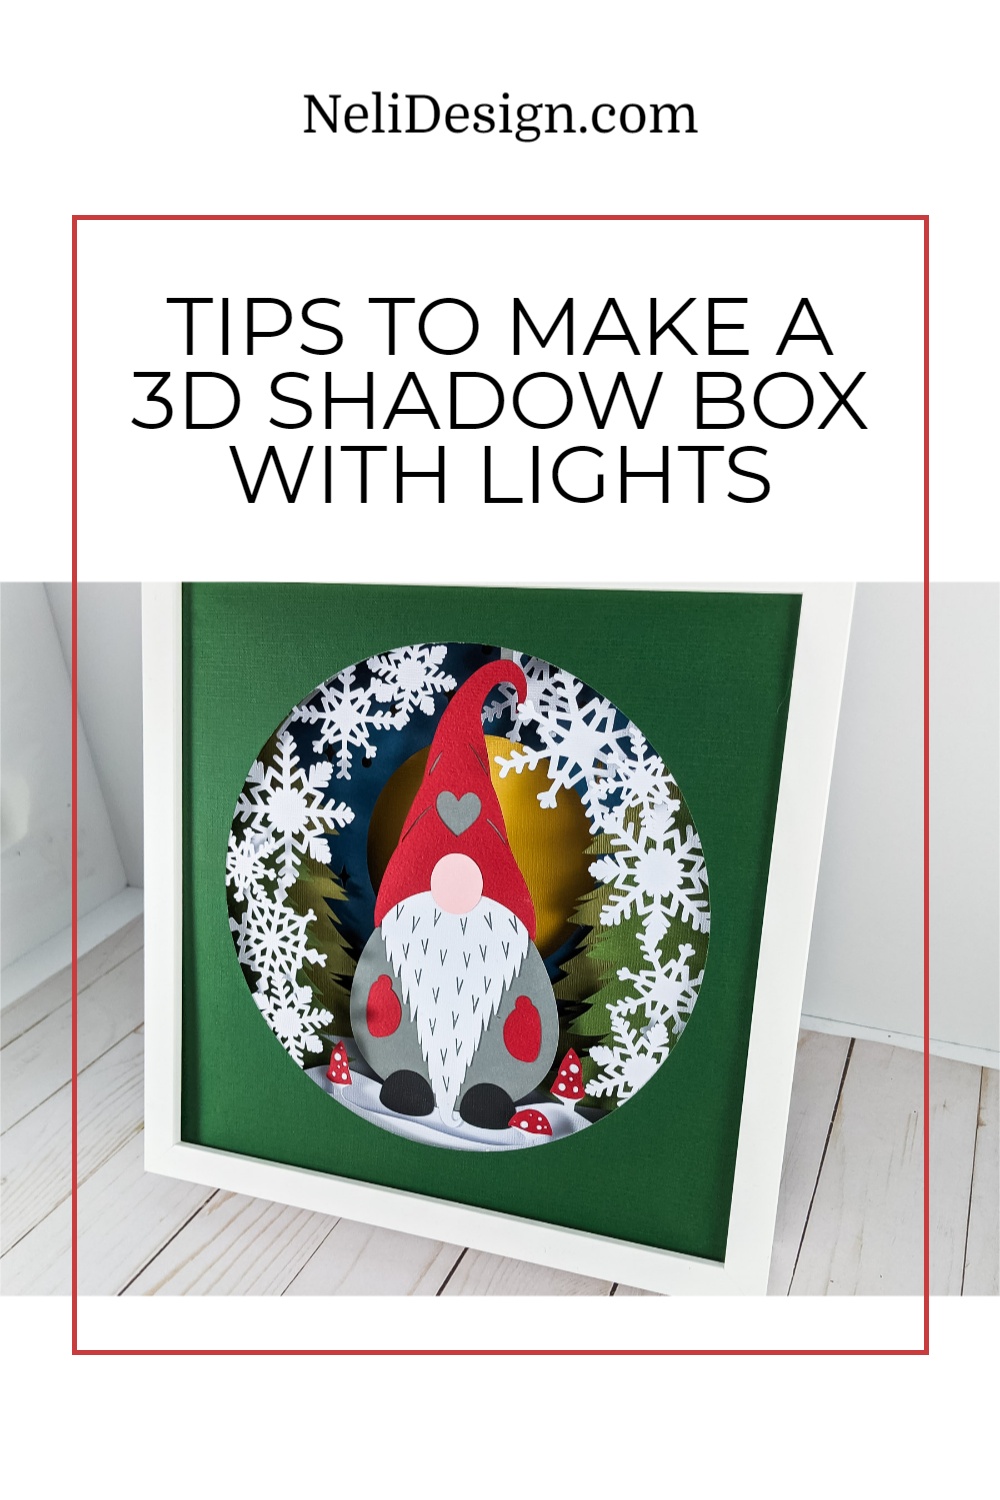 Tips for making 3D ball boxes with lights.